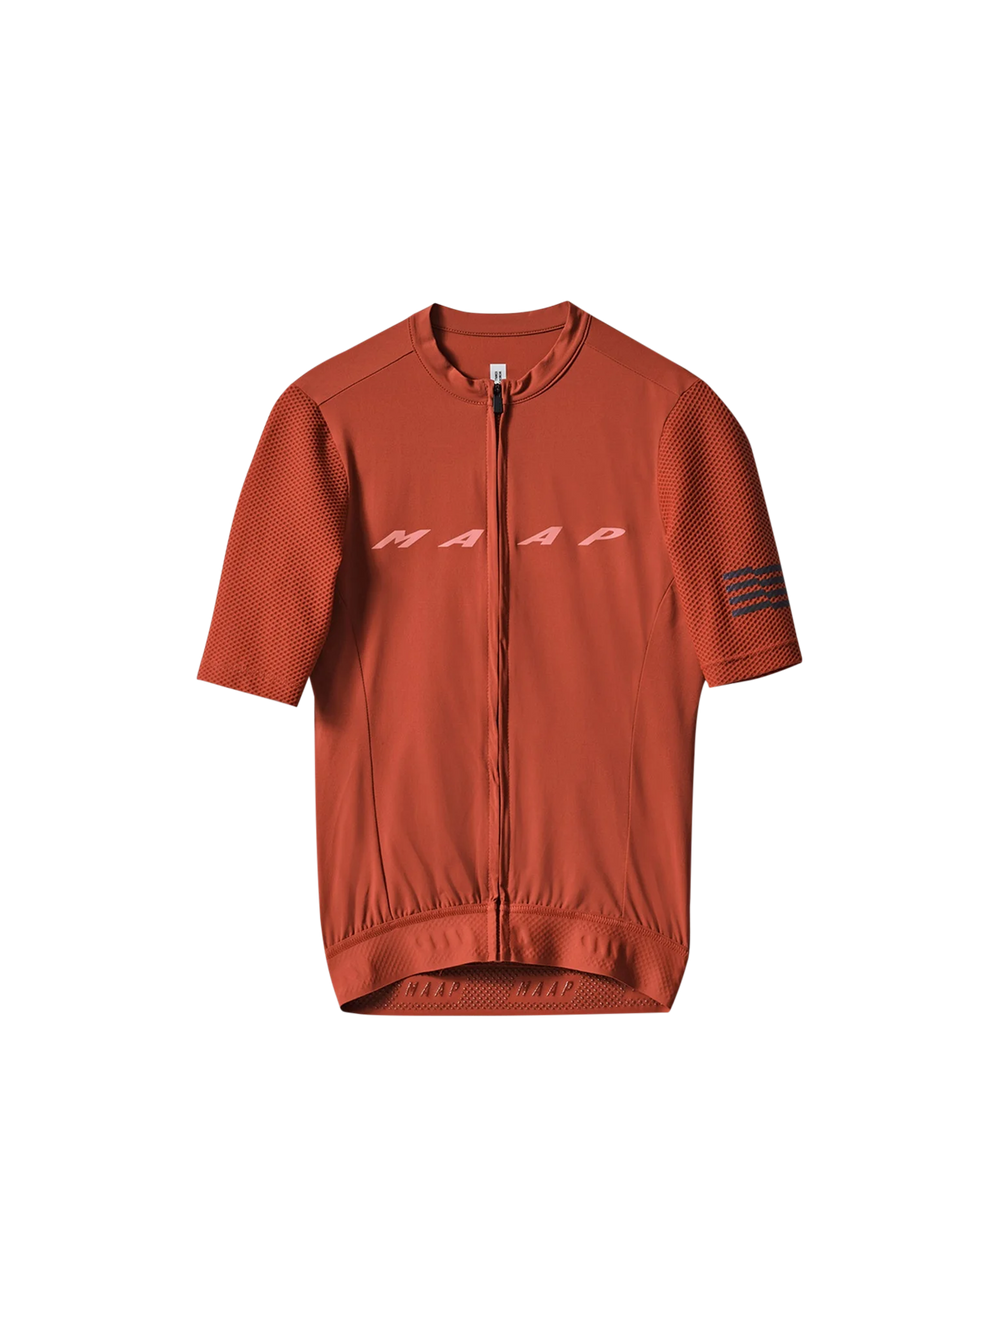 Product Image for Women's Evade Pro Base Jersey